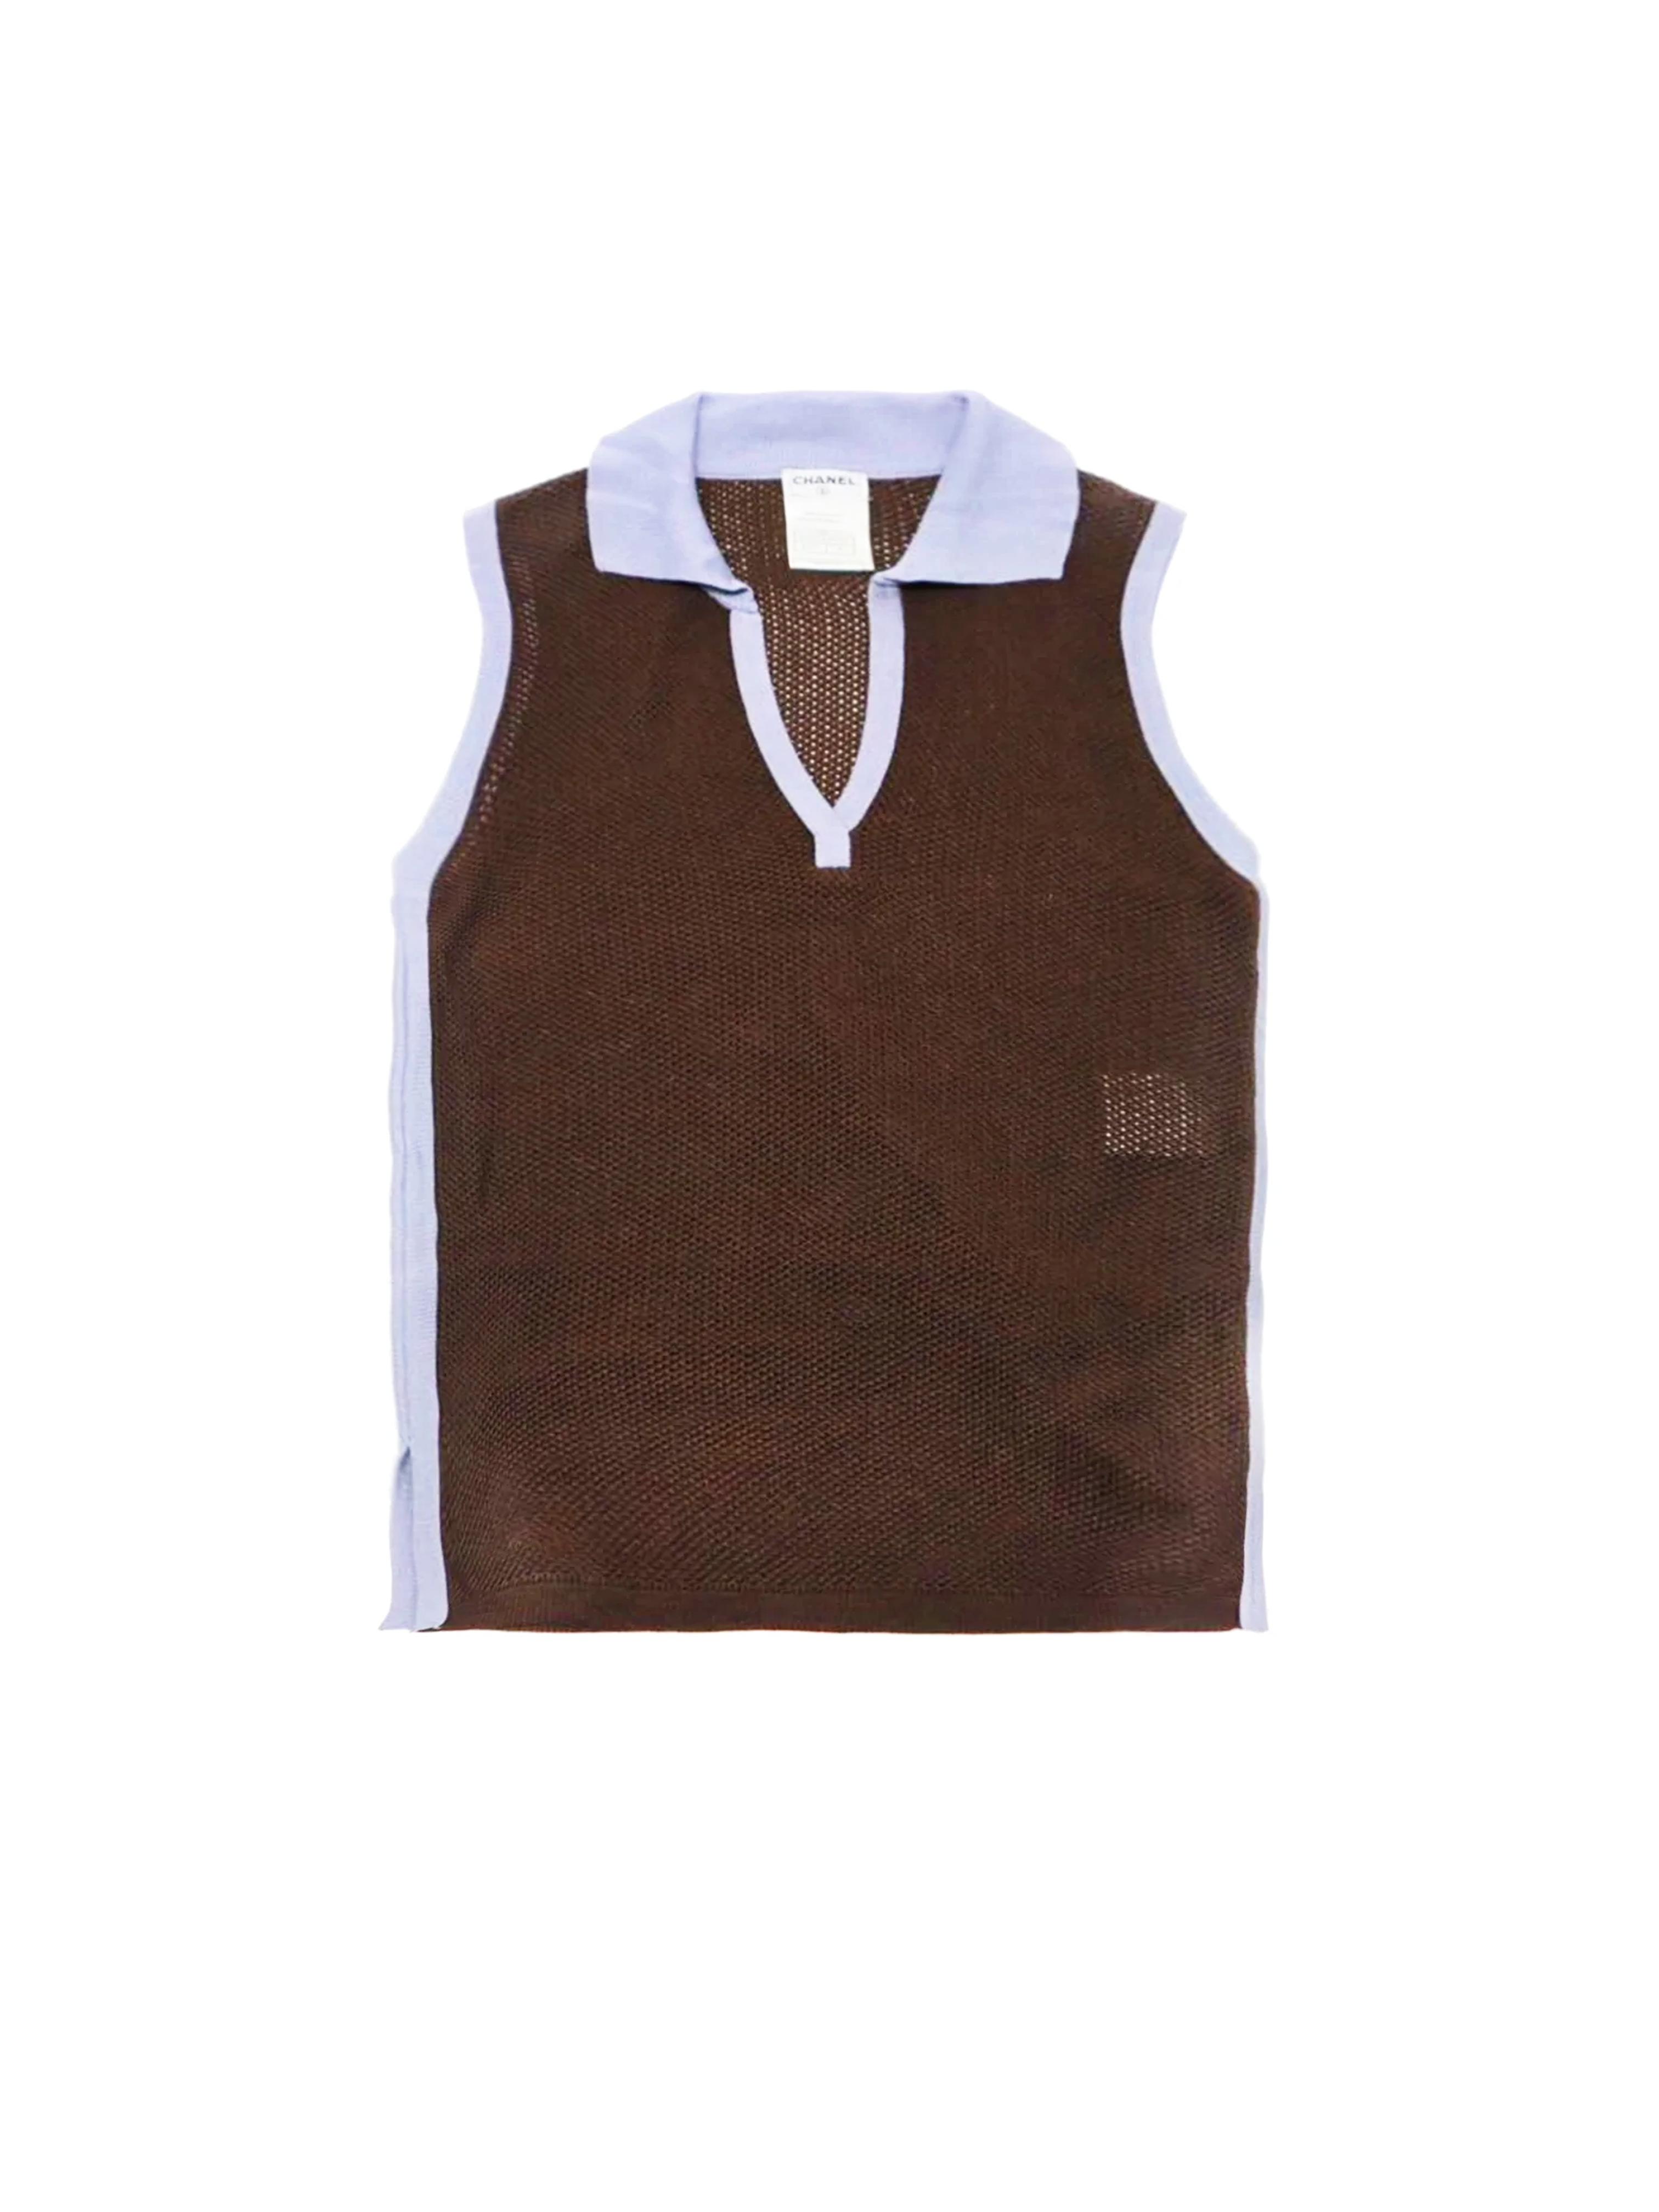 Chanel 2000s Purple and Brown Rare Knit Tank